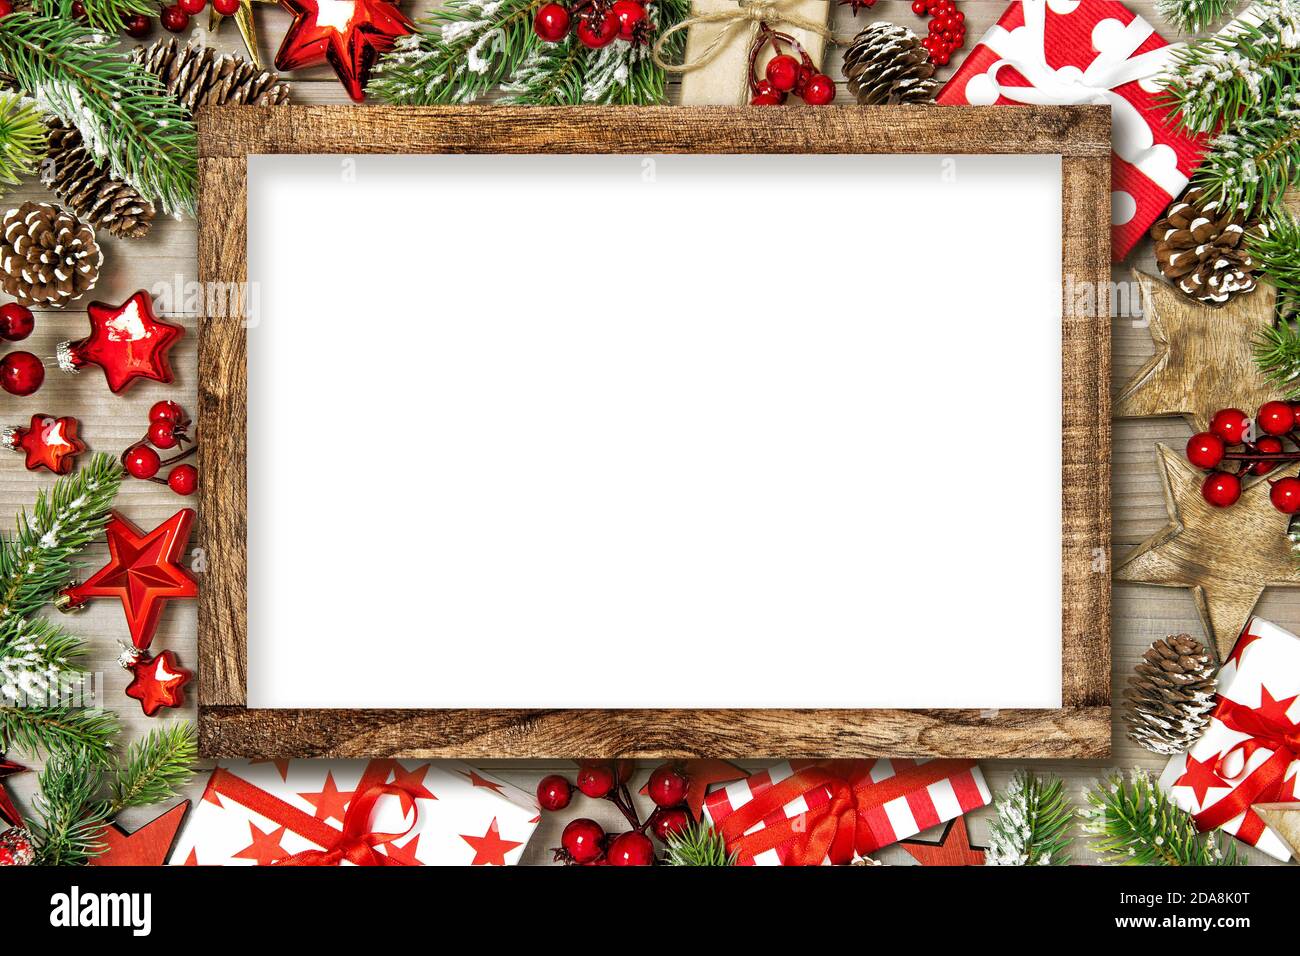 Christmas decorations and red ornaments. Wooden frame mockup Stock Photo